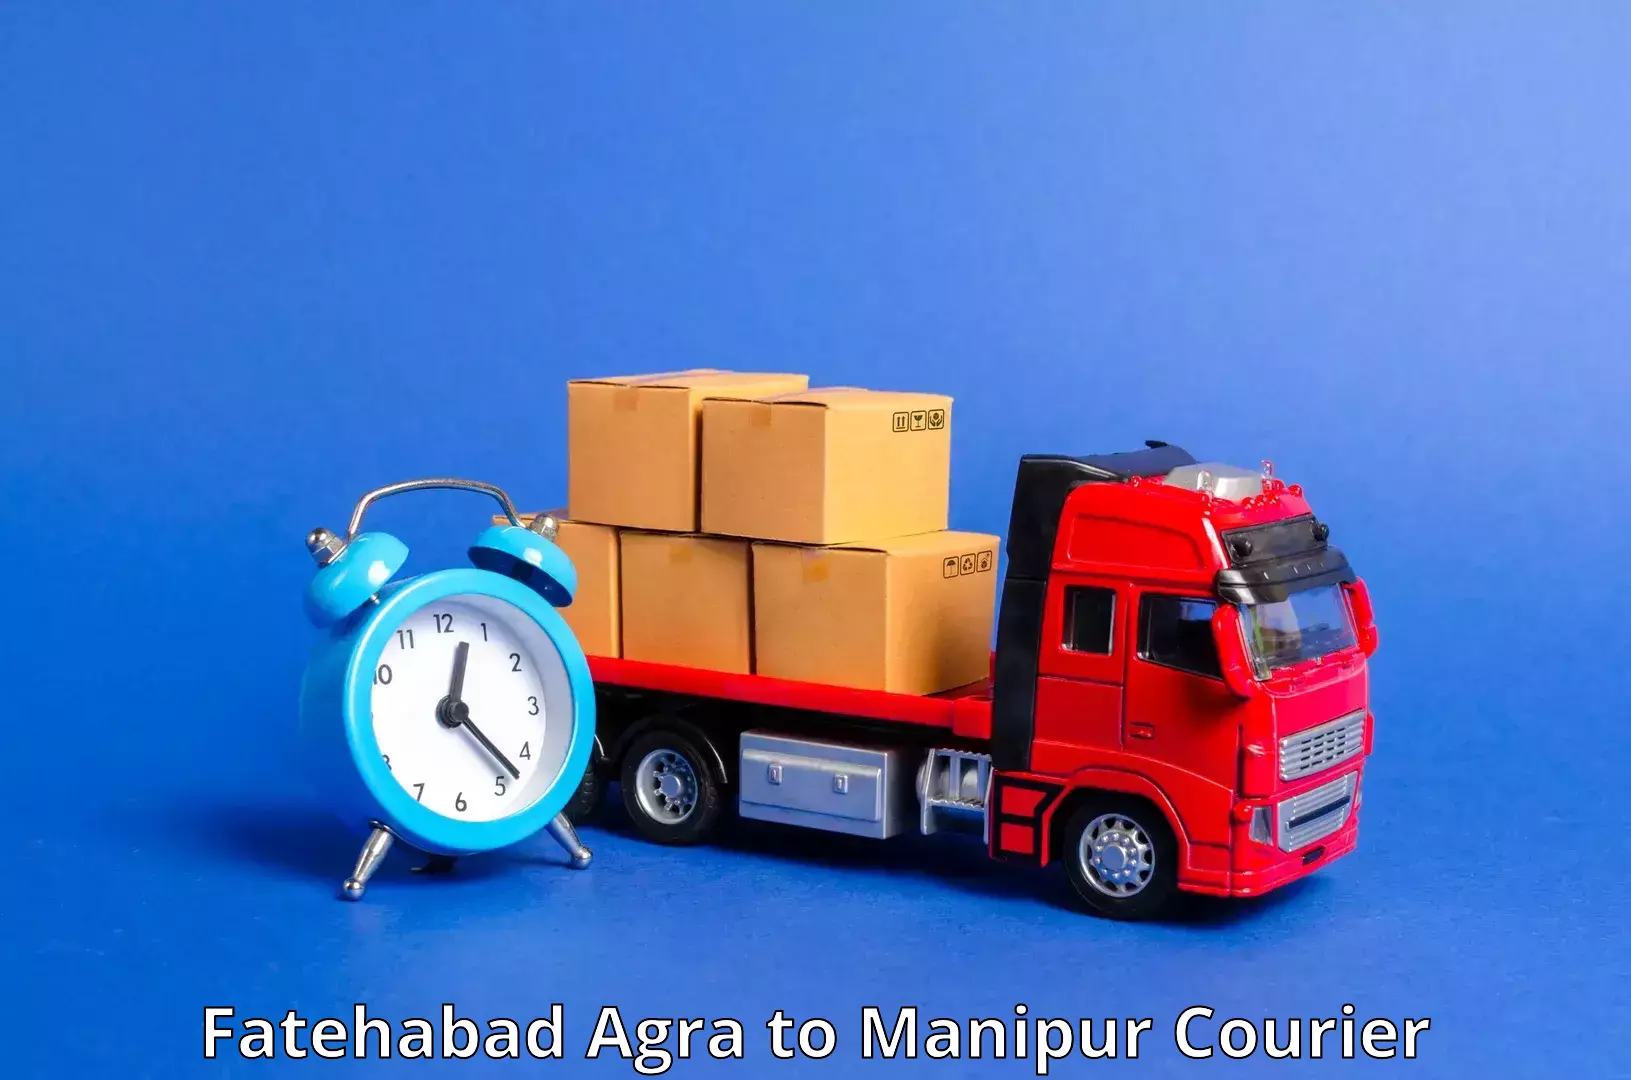 Multi-national courier services Fatehabad Agra to Ukhrul